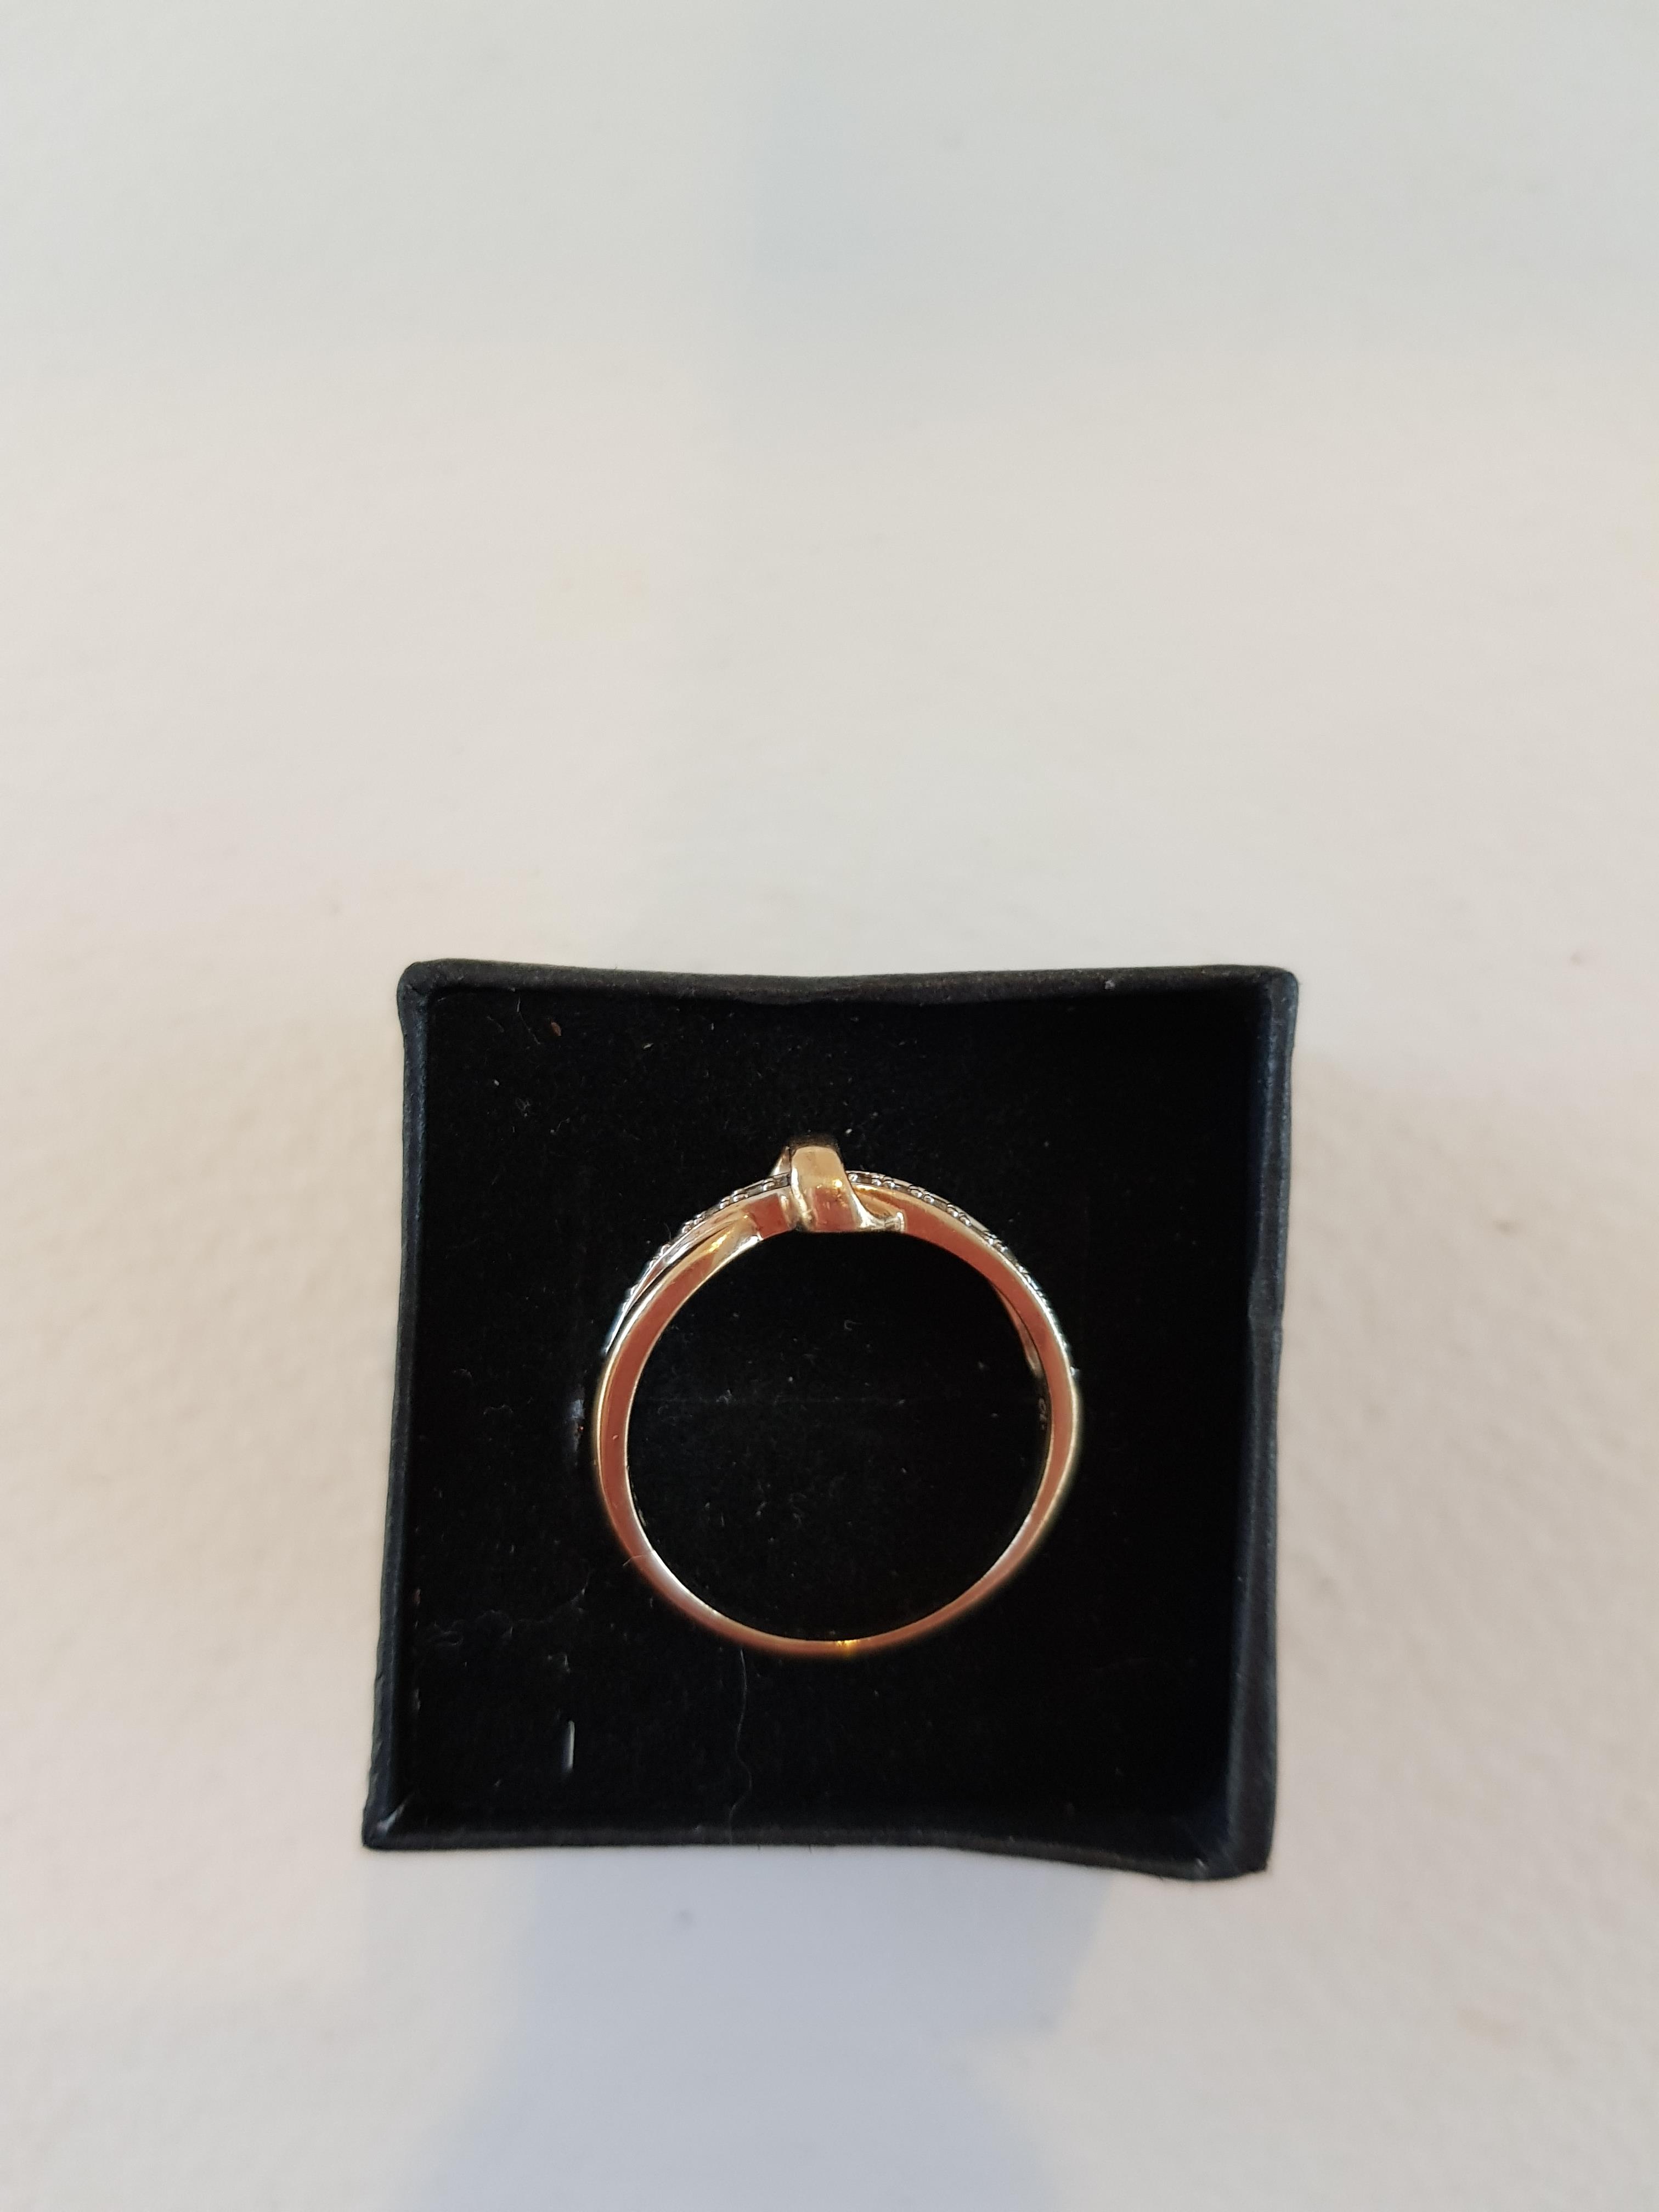 9ct Gold Two-tone Knot Ring - Image 2 of 2